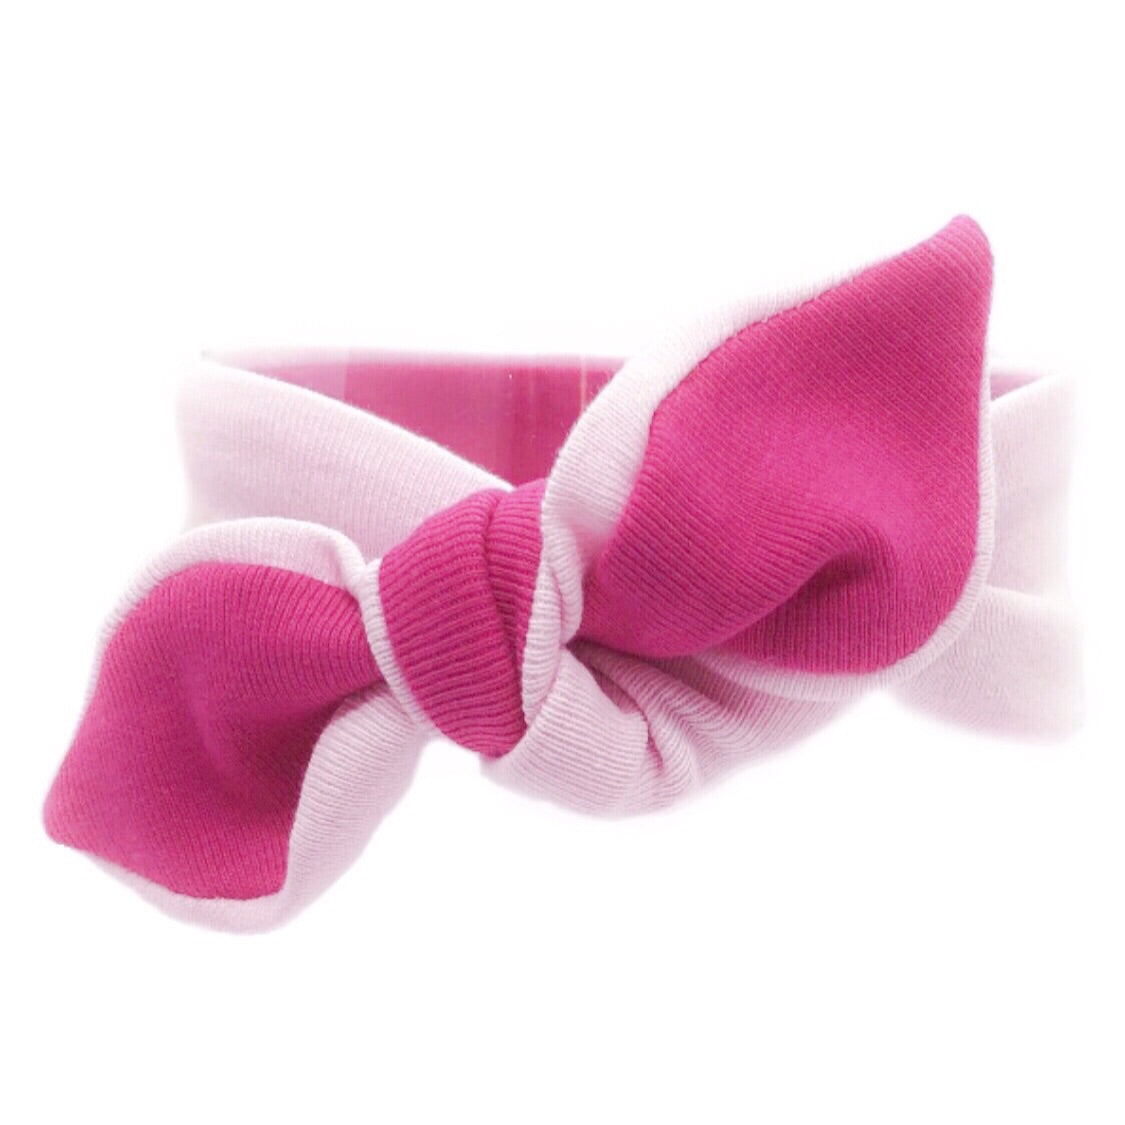 Baby & Toddler Knotted Hair Band/Bow - Pink